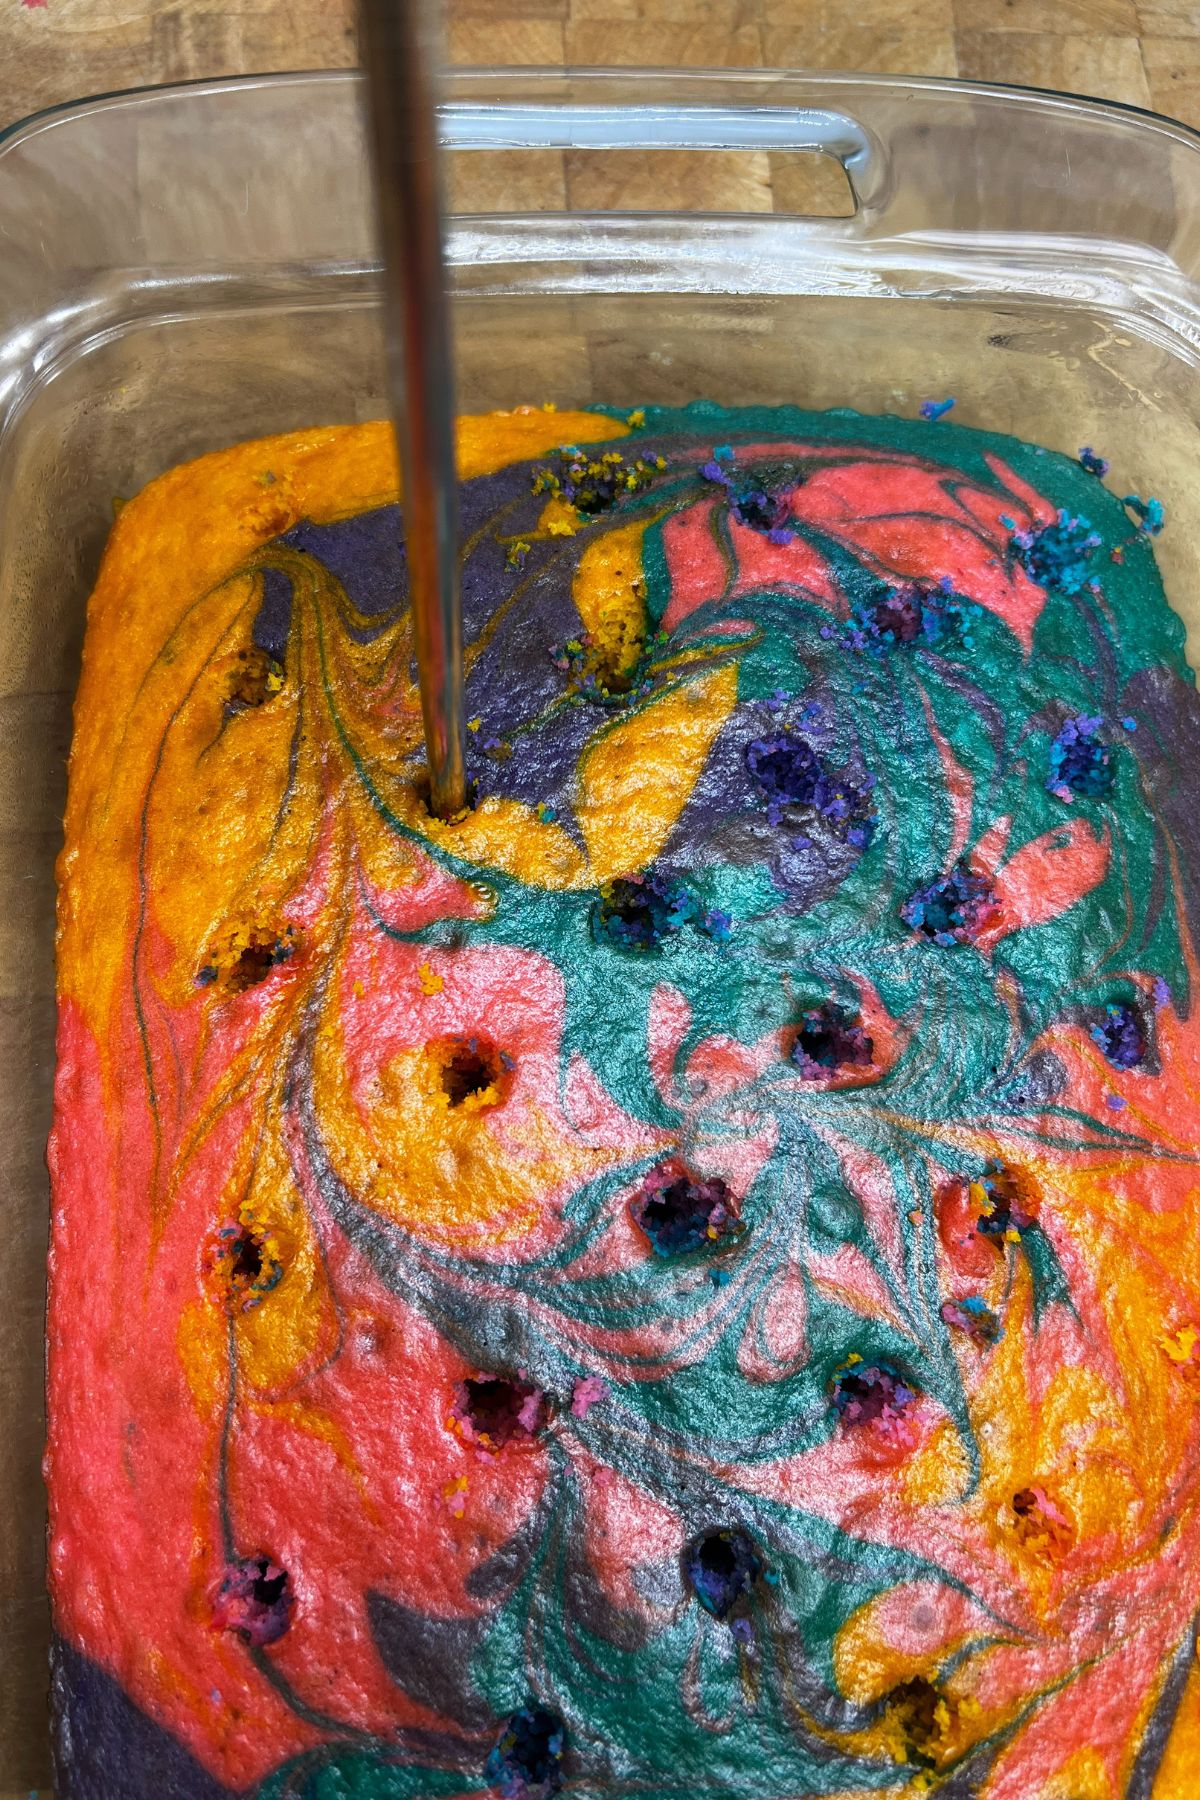 Poking holes in a colorful cake.